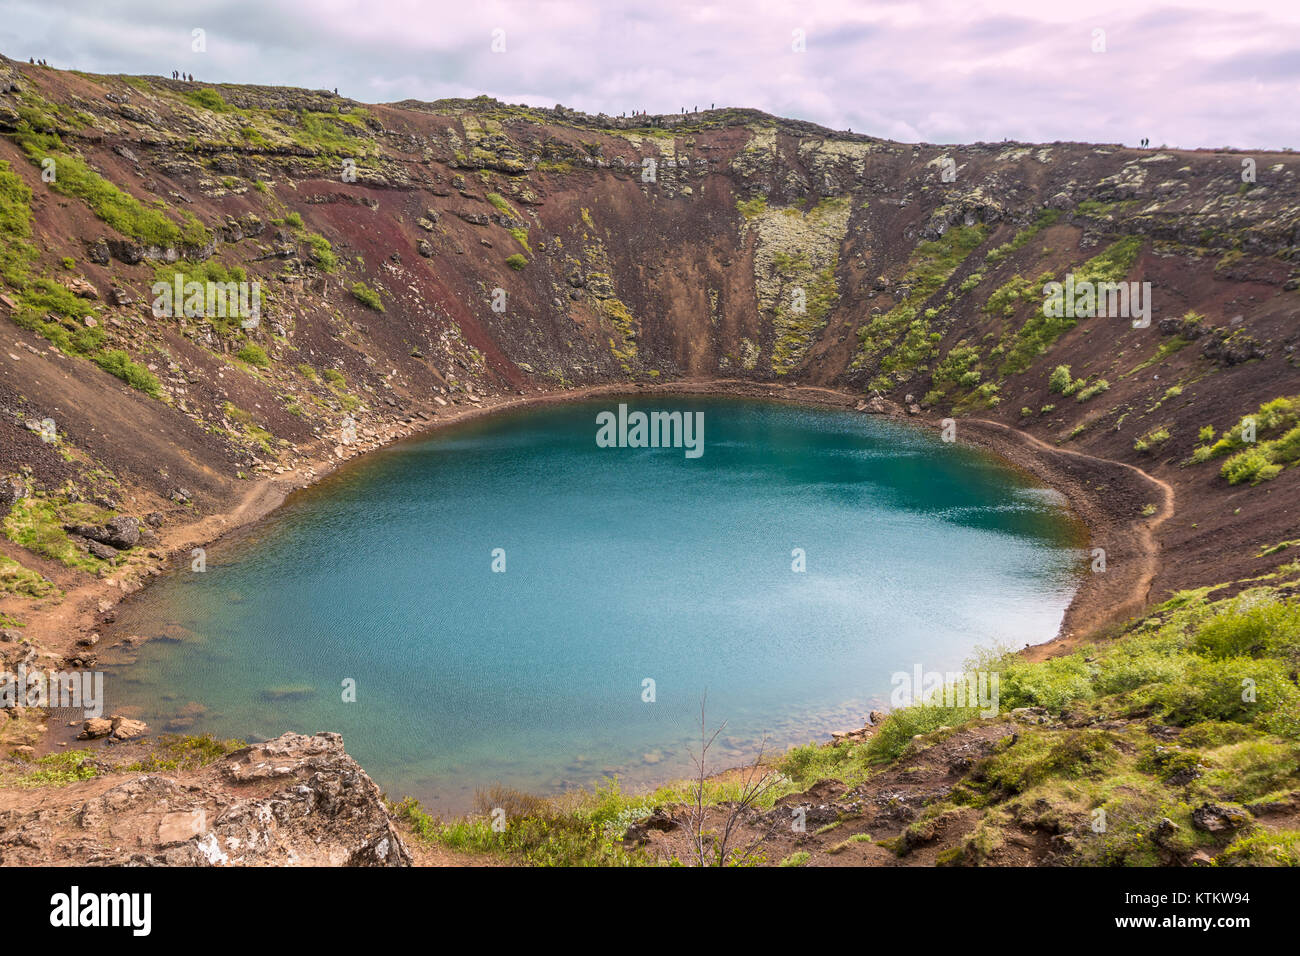 View of Crater in Iceland Stock Photo